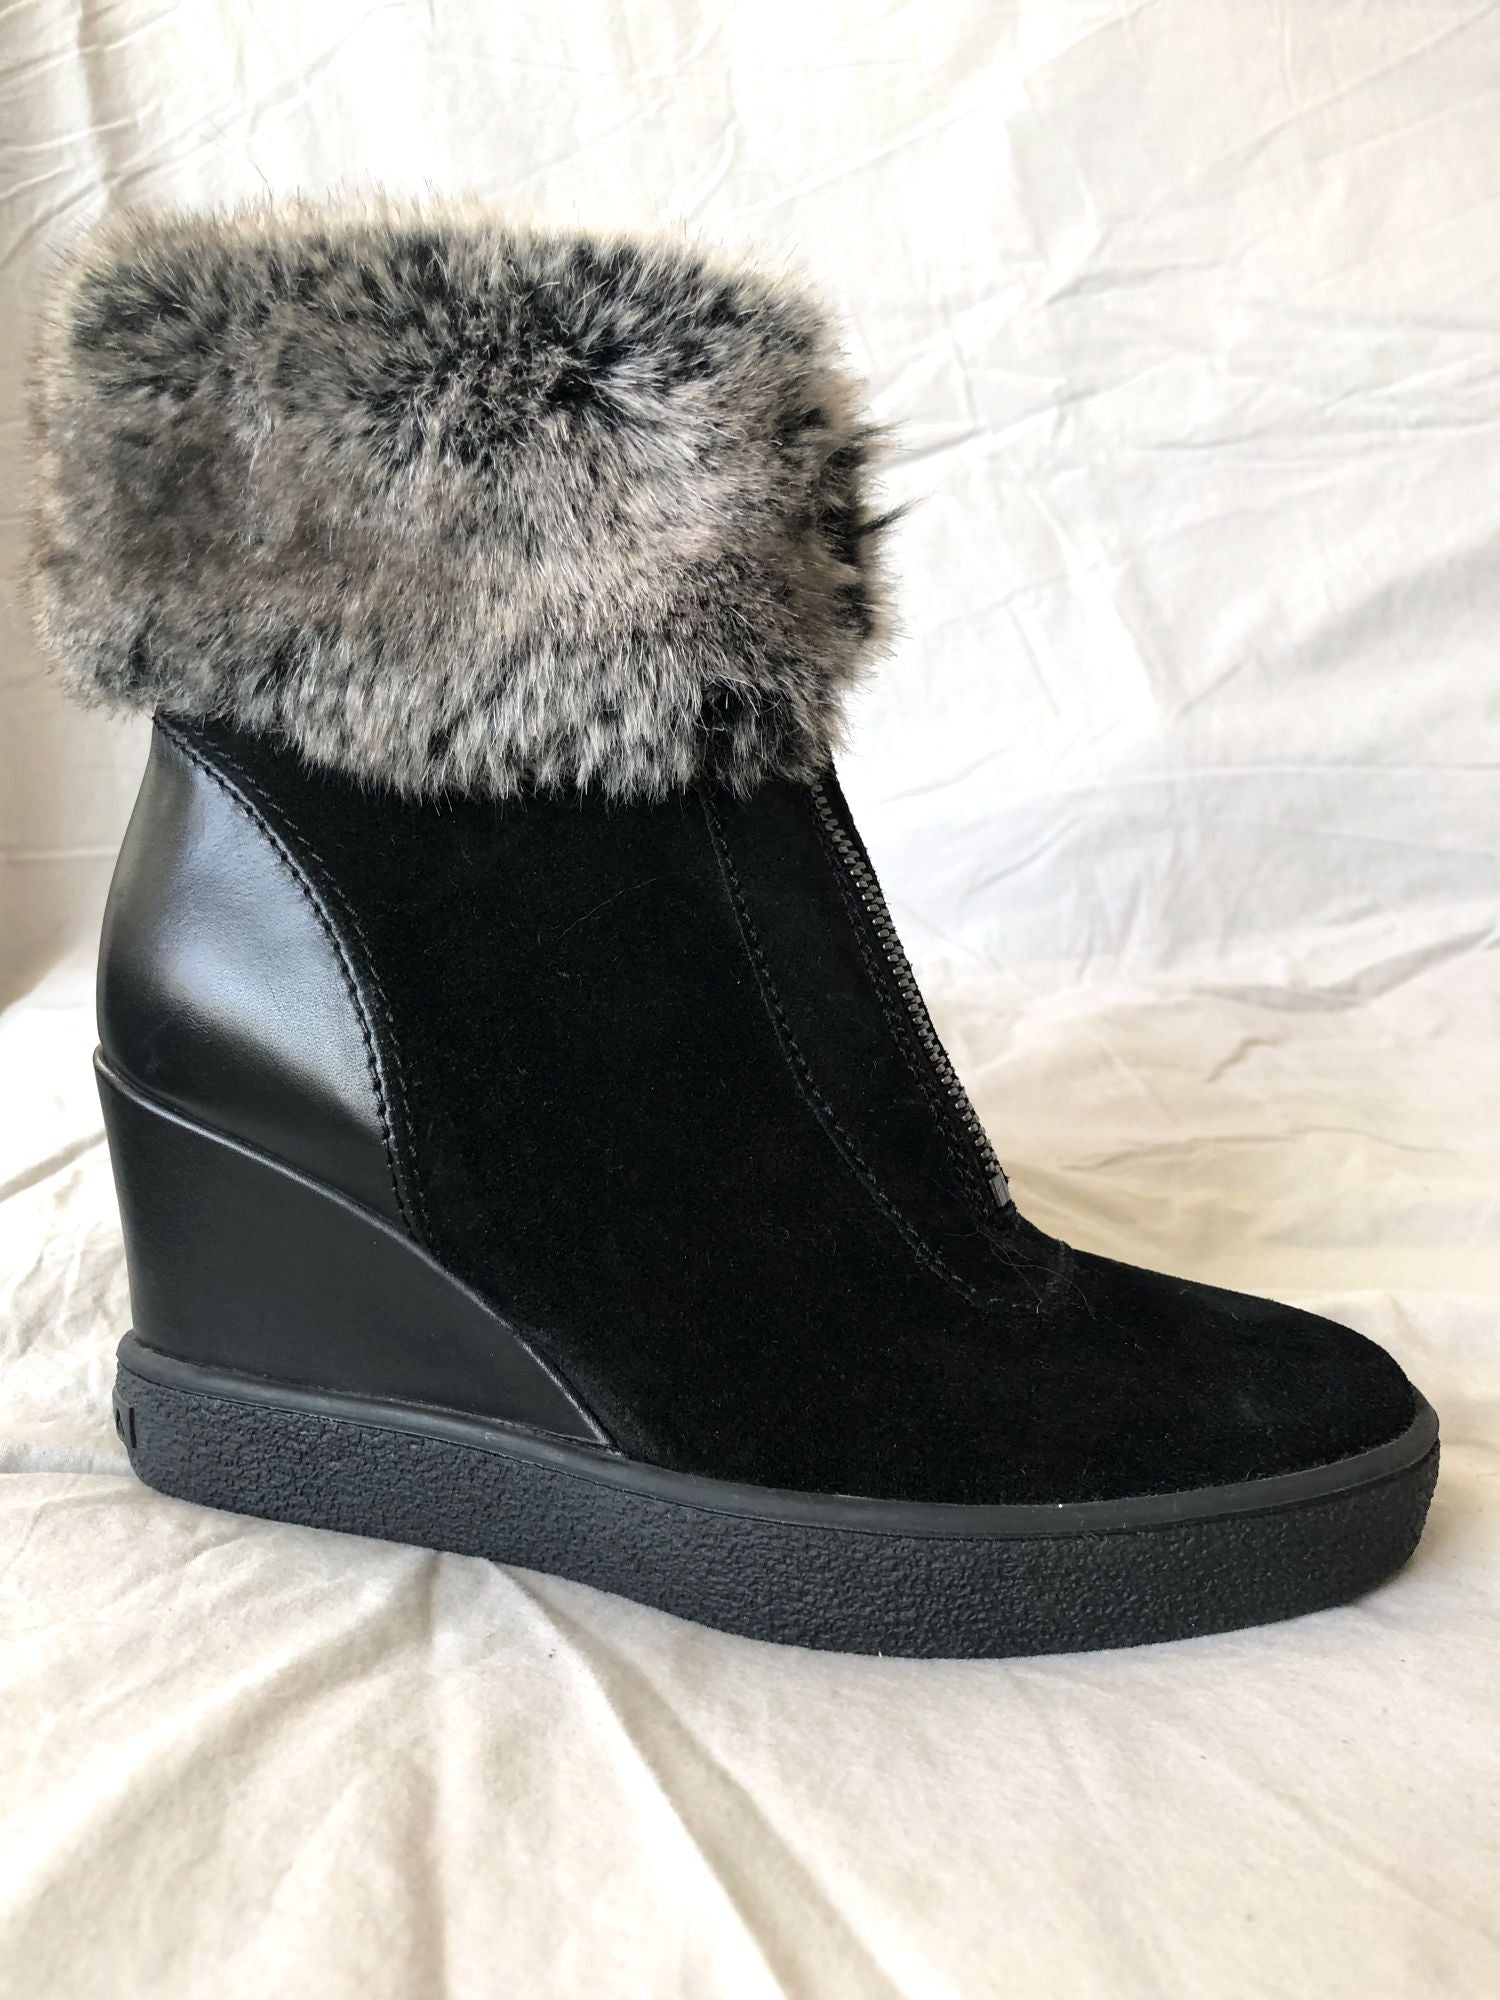 Aquatalia Size 6 - NEW - Fur Topped Wedge Boots